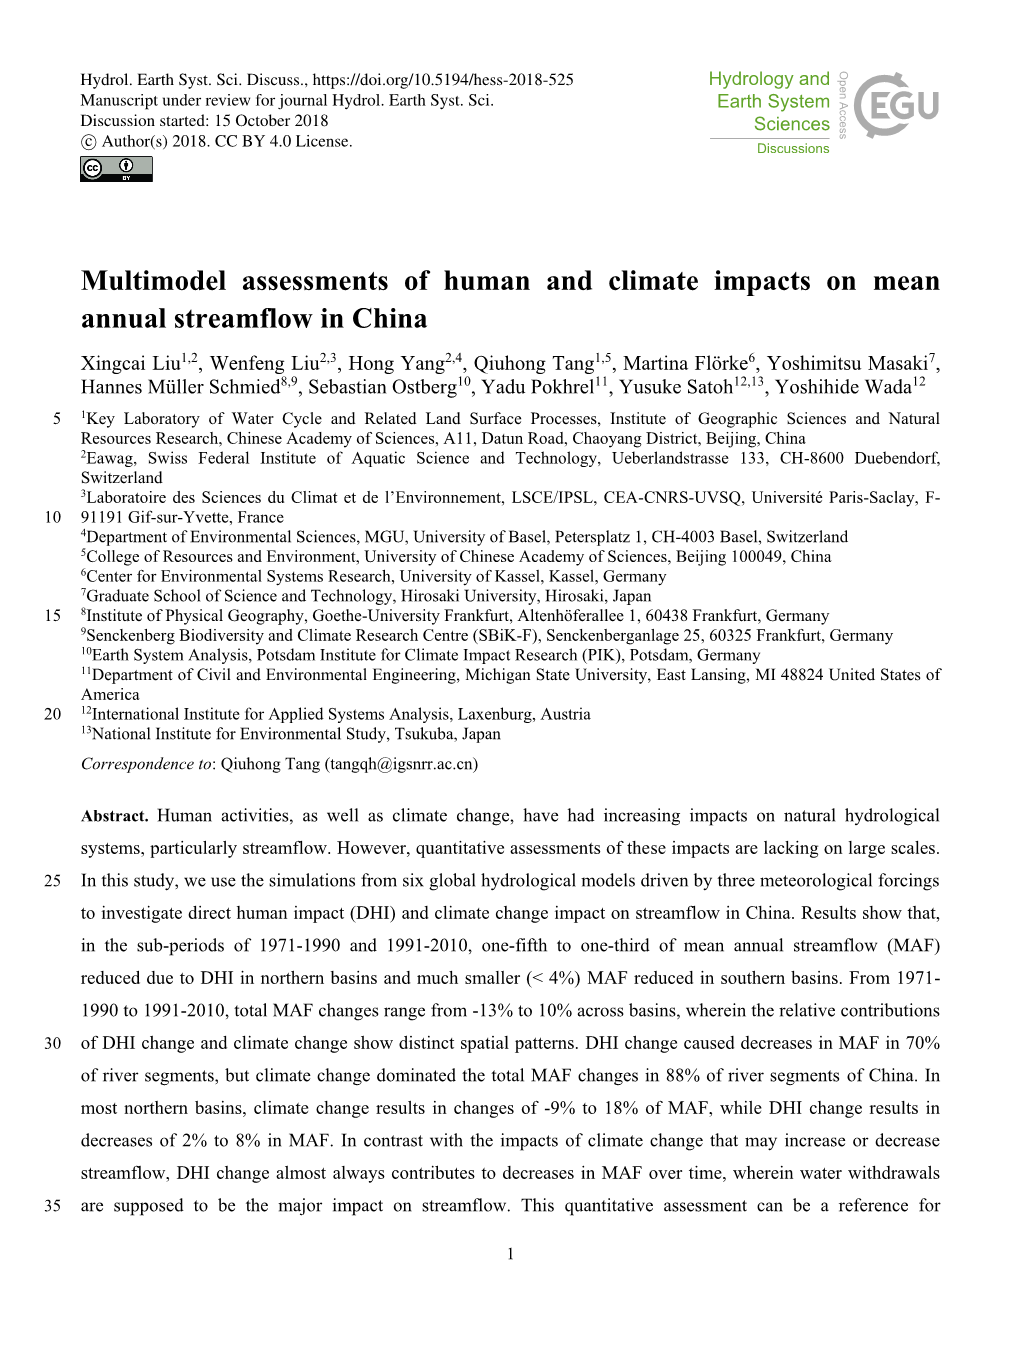 Multimodel Assessments of Human and Climate Impacts on Mean